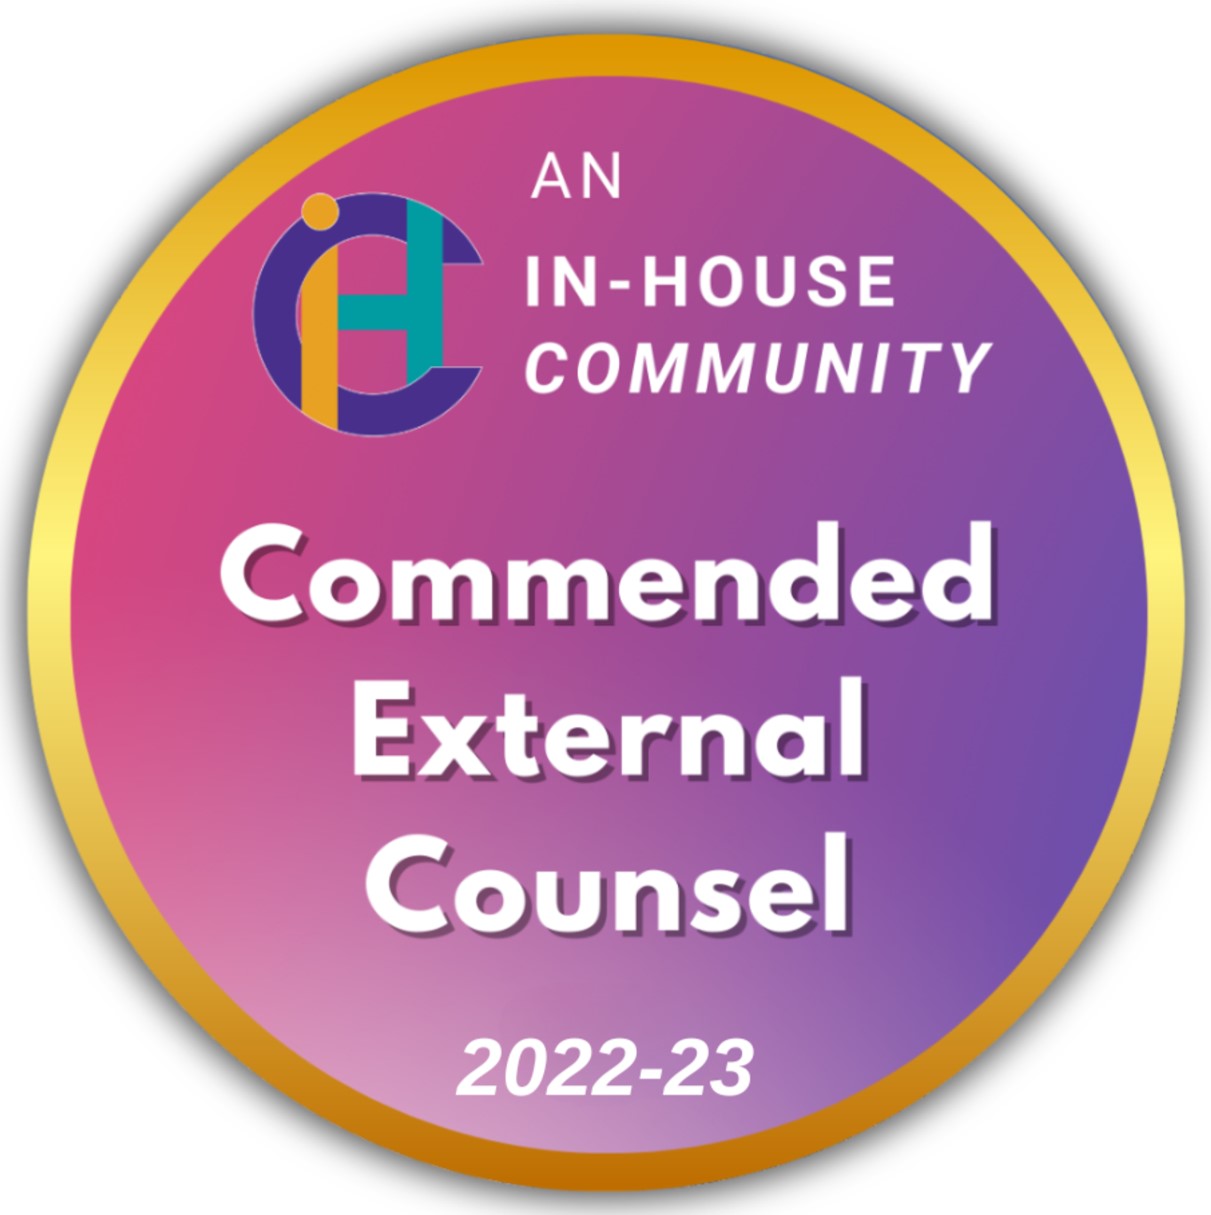 Named as an “In-House Community Commended External Counsel of the Year” by In-House Community, 2022-23